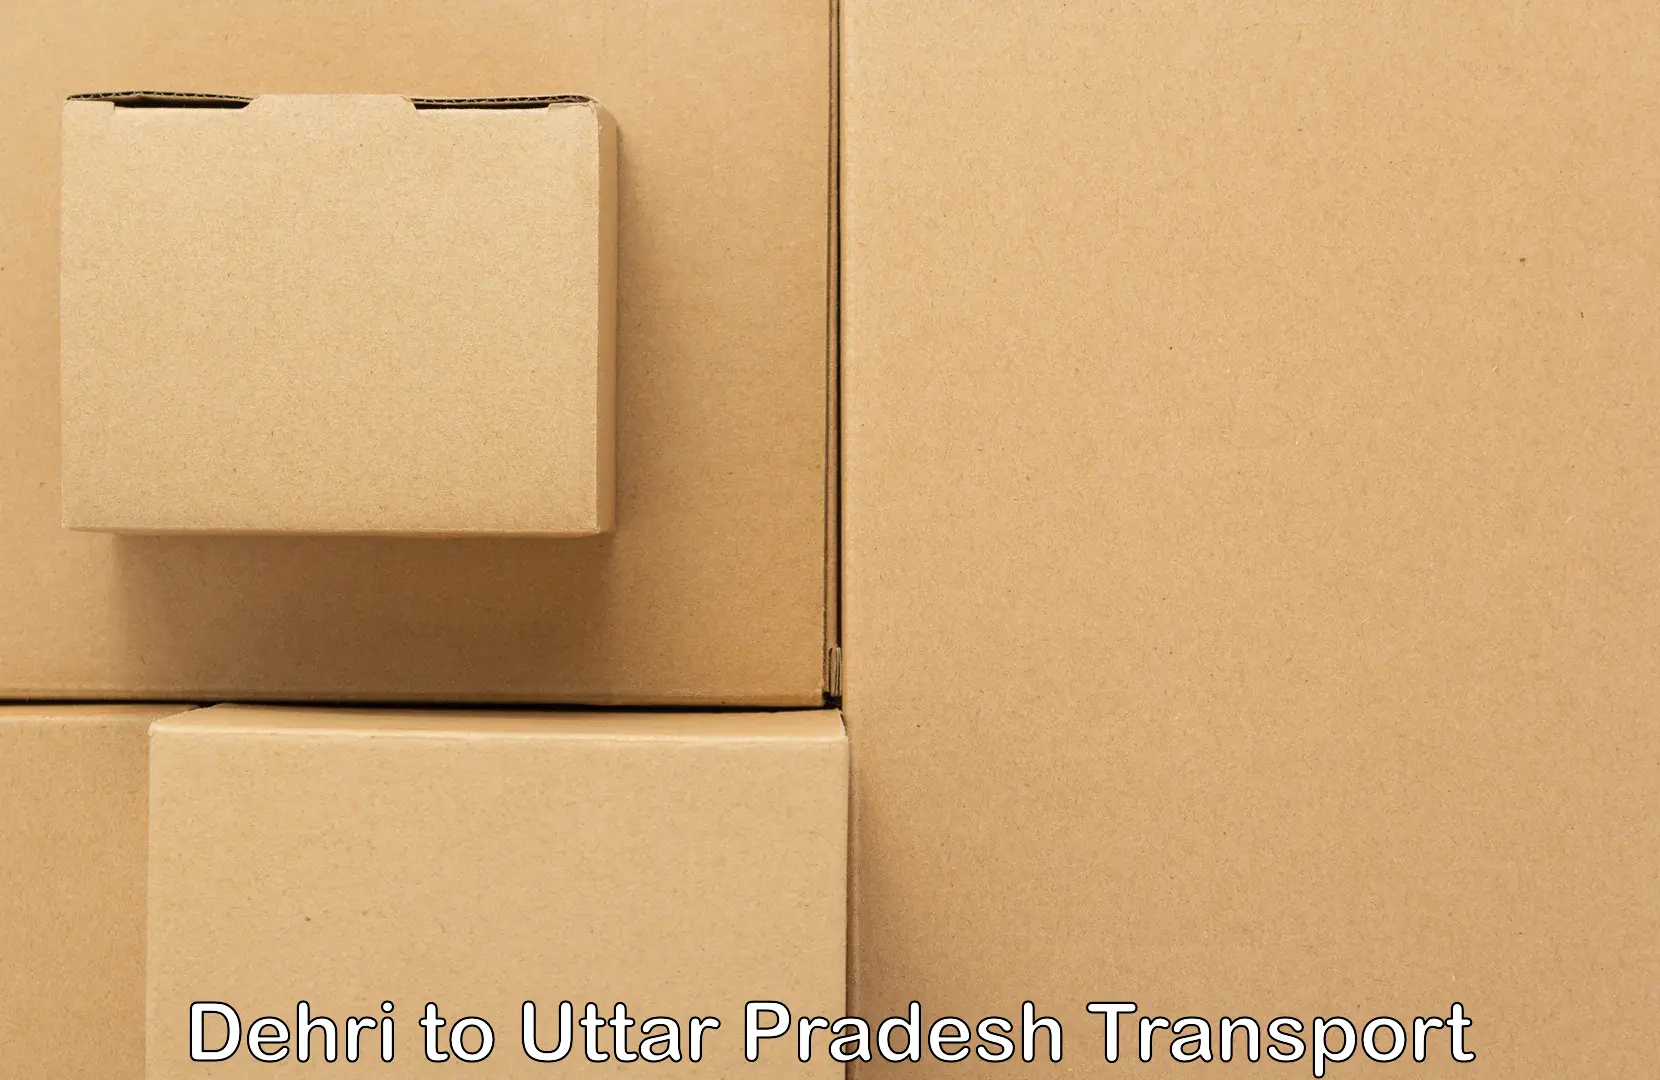 Truck transport companies in India in Dehri to Lucknow